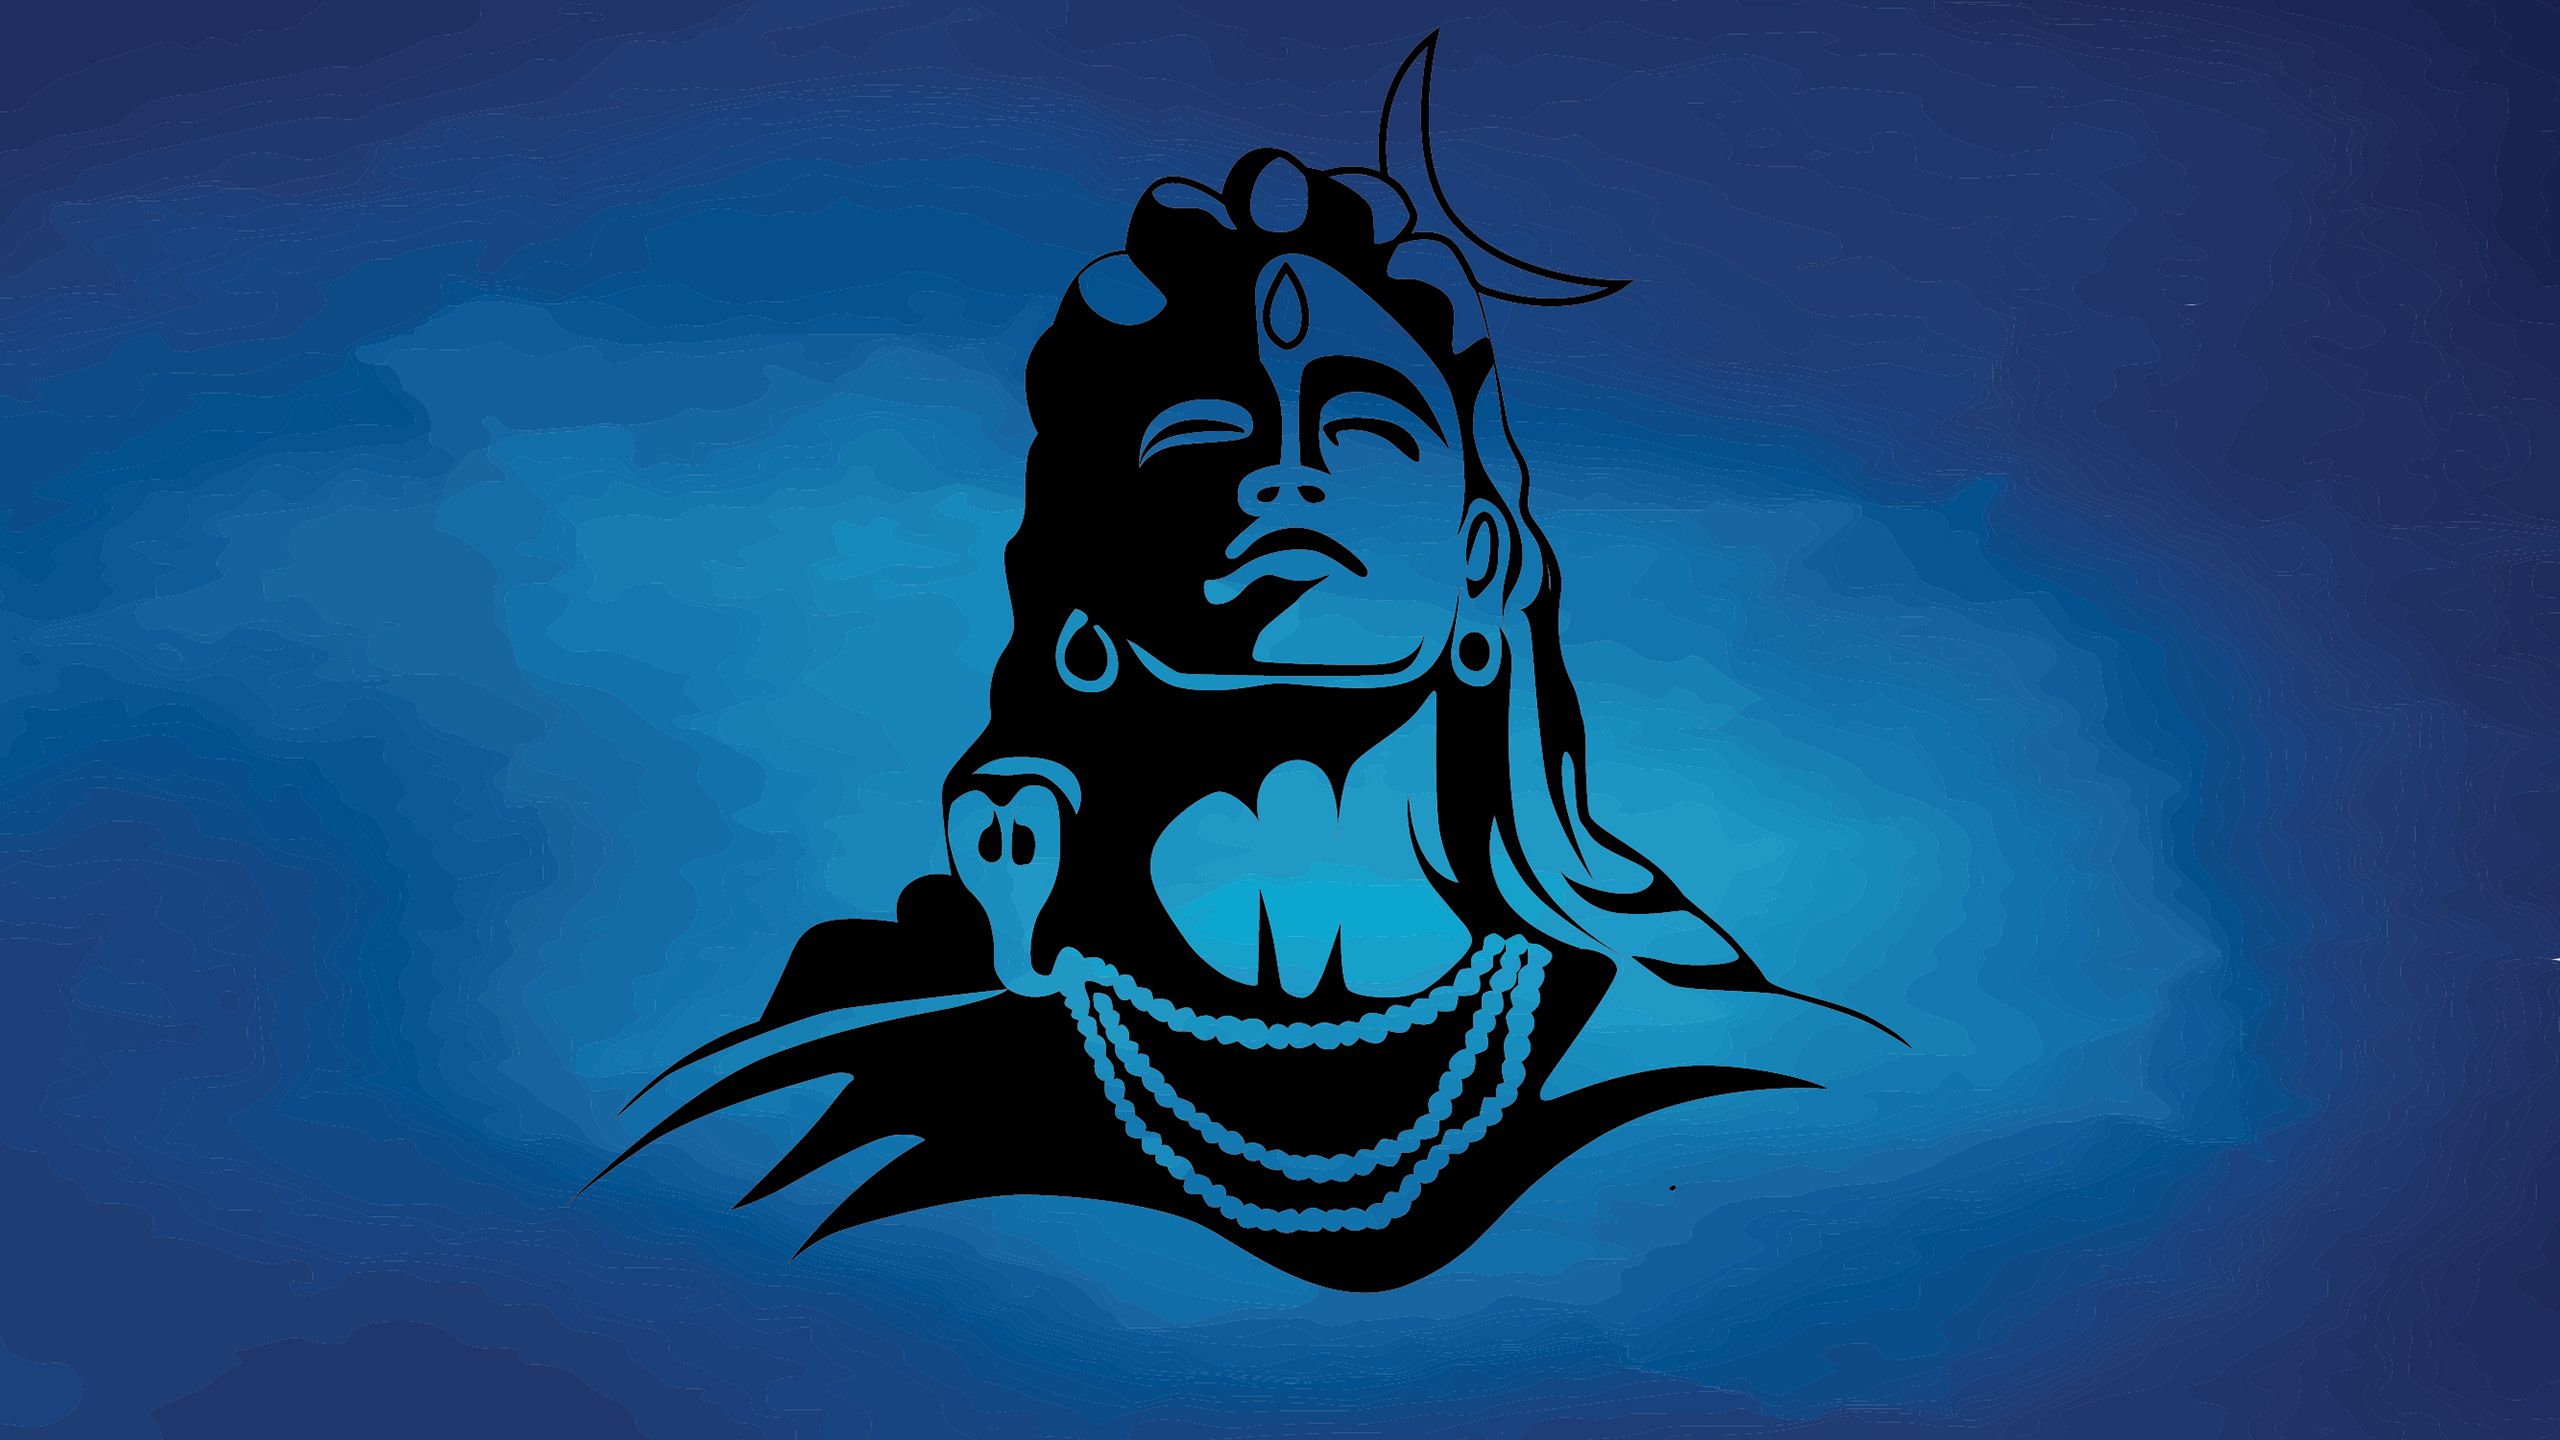 Buy Online Center Lord Shiva Wall Poster Religious Wall Decal and Poster  Collection HD Wallpaper MulticolorVinyl Sticker Poster 18x24 inch Online  at Low Prices in India  Amazonin